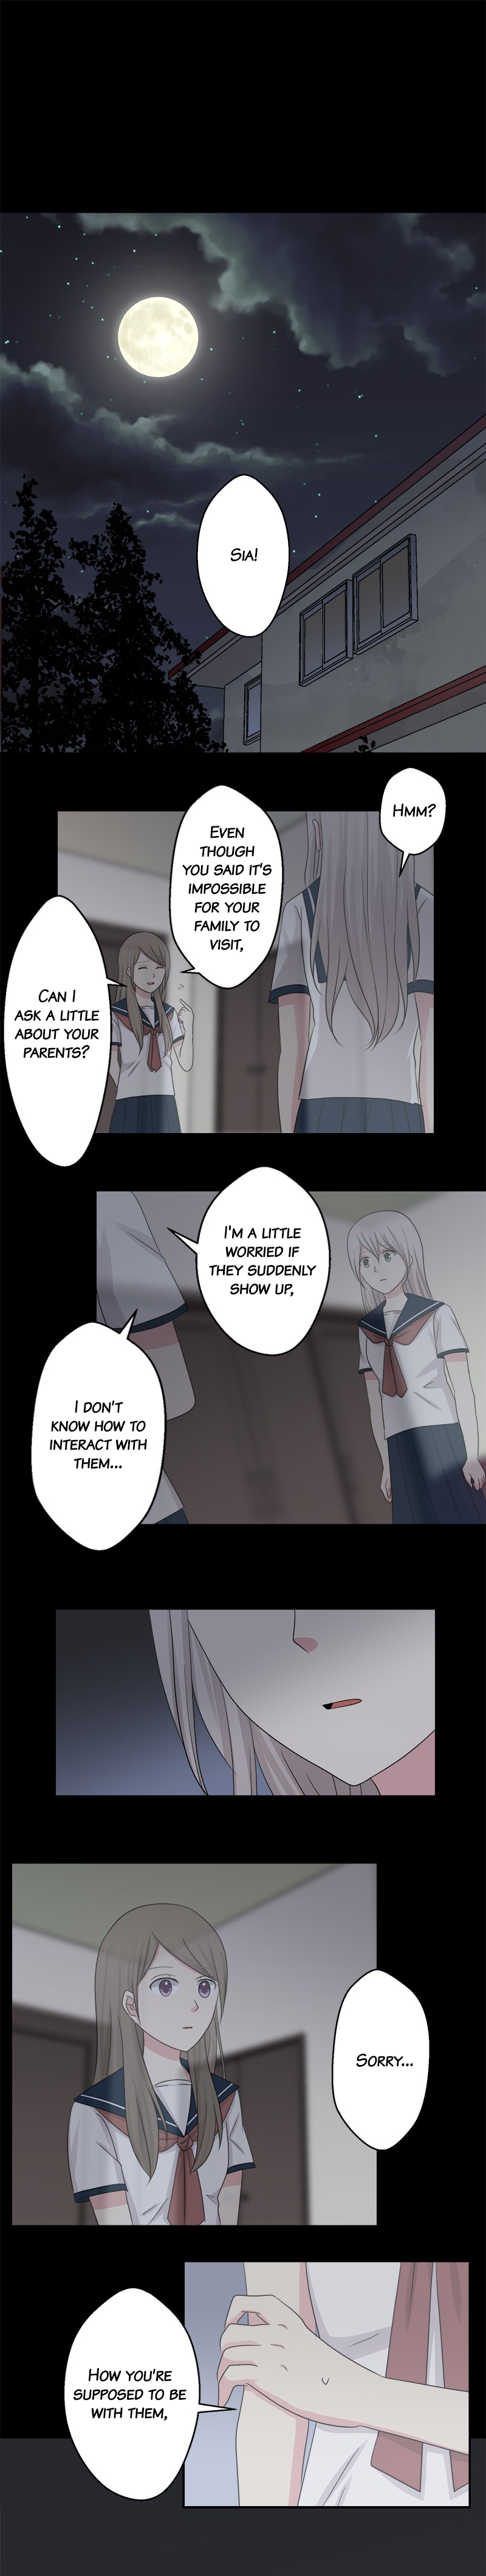 Switched Girls - Page 1